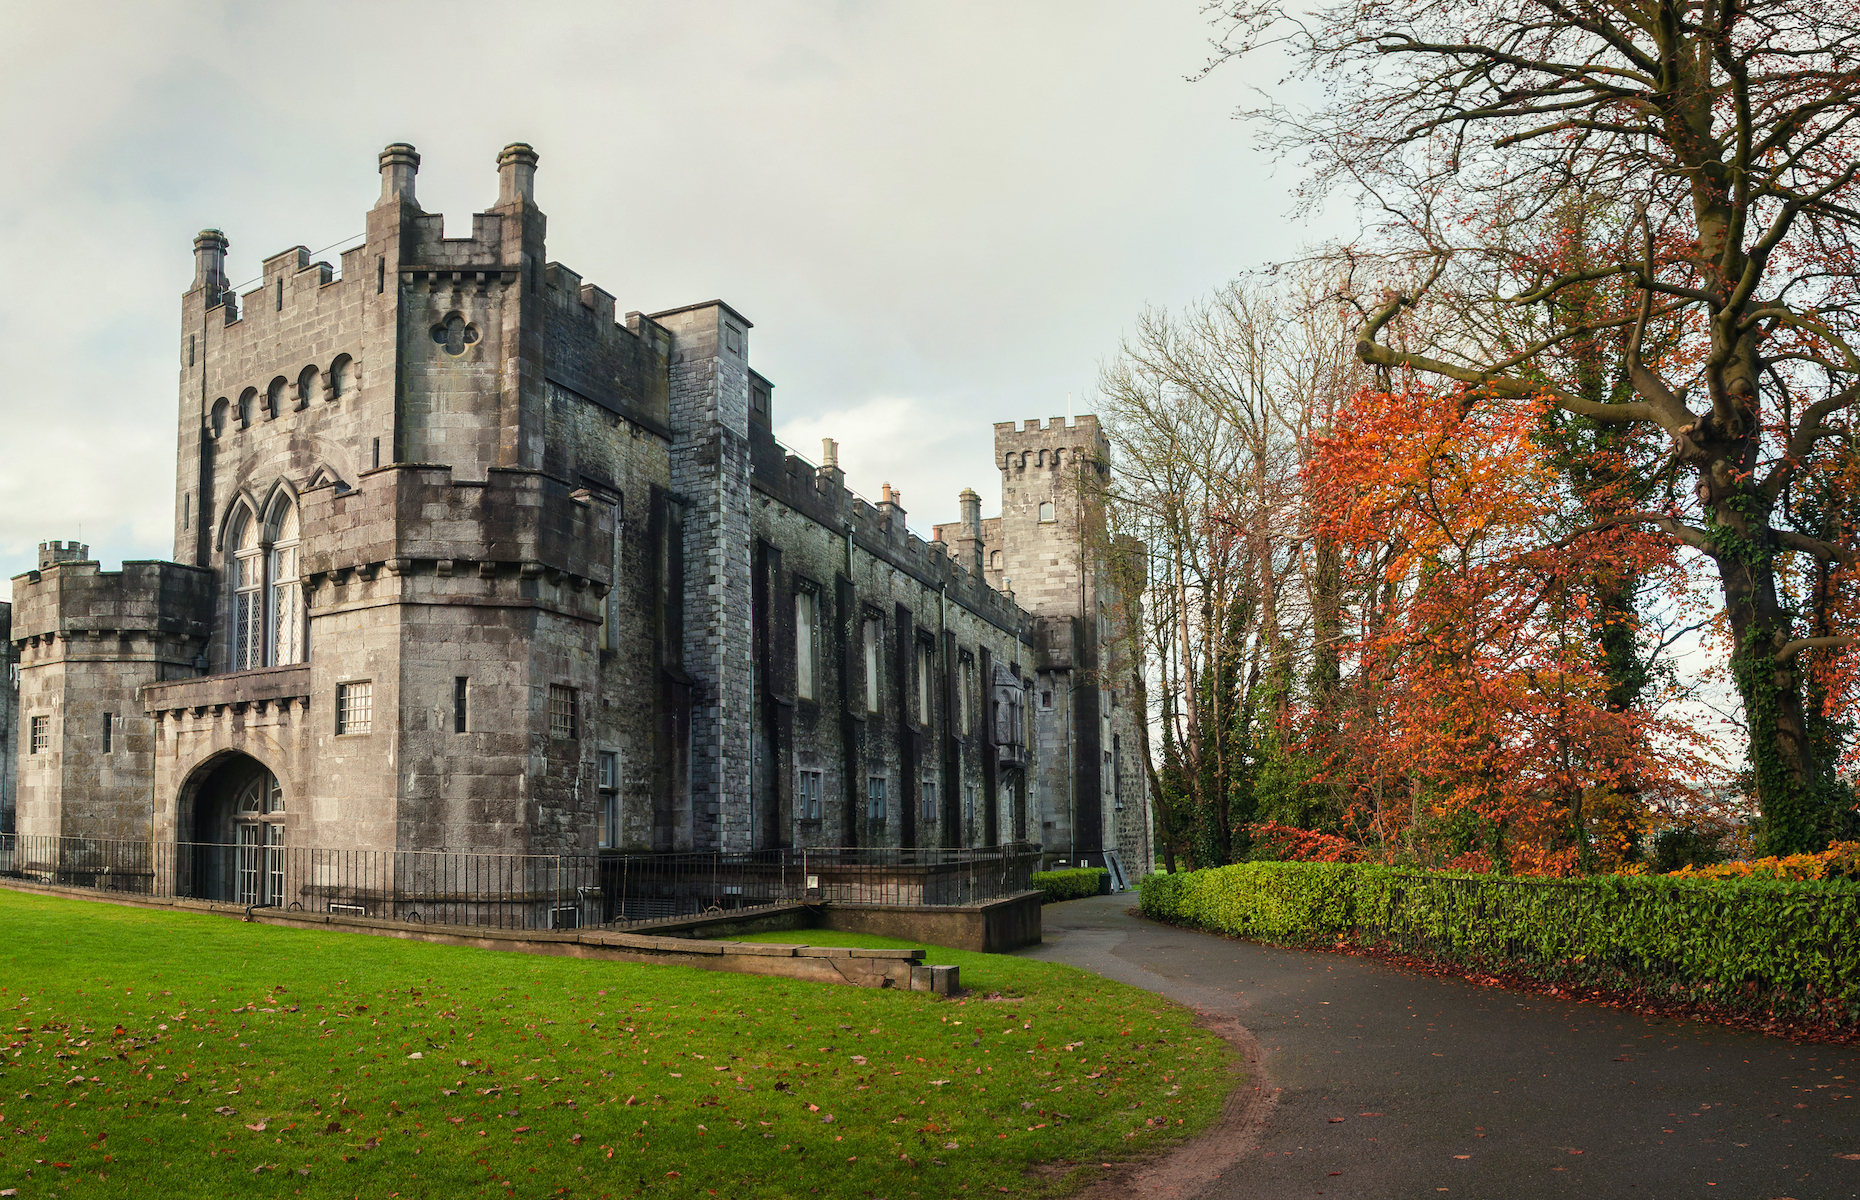 <p>Built around 1195 following the Norman conquest of Ireland, <a href="https://kilkennycastle.ie/" rel="noreferrer noopener">Kilkenny Castle</a> was originally designed to defend and control certain roads. Over the past 800 years, it has undergone many modifications and expansions and is now open to travellers and local residents. Kilkenny’s rose garden and tea room are among the most beautiful sites during any visit.</p>